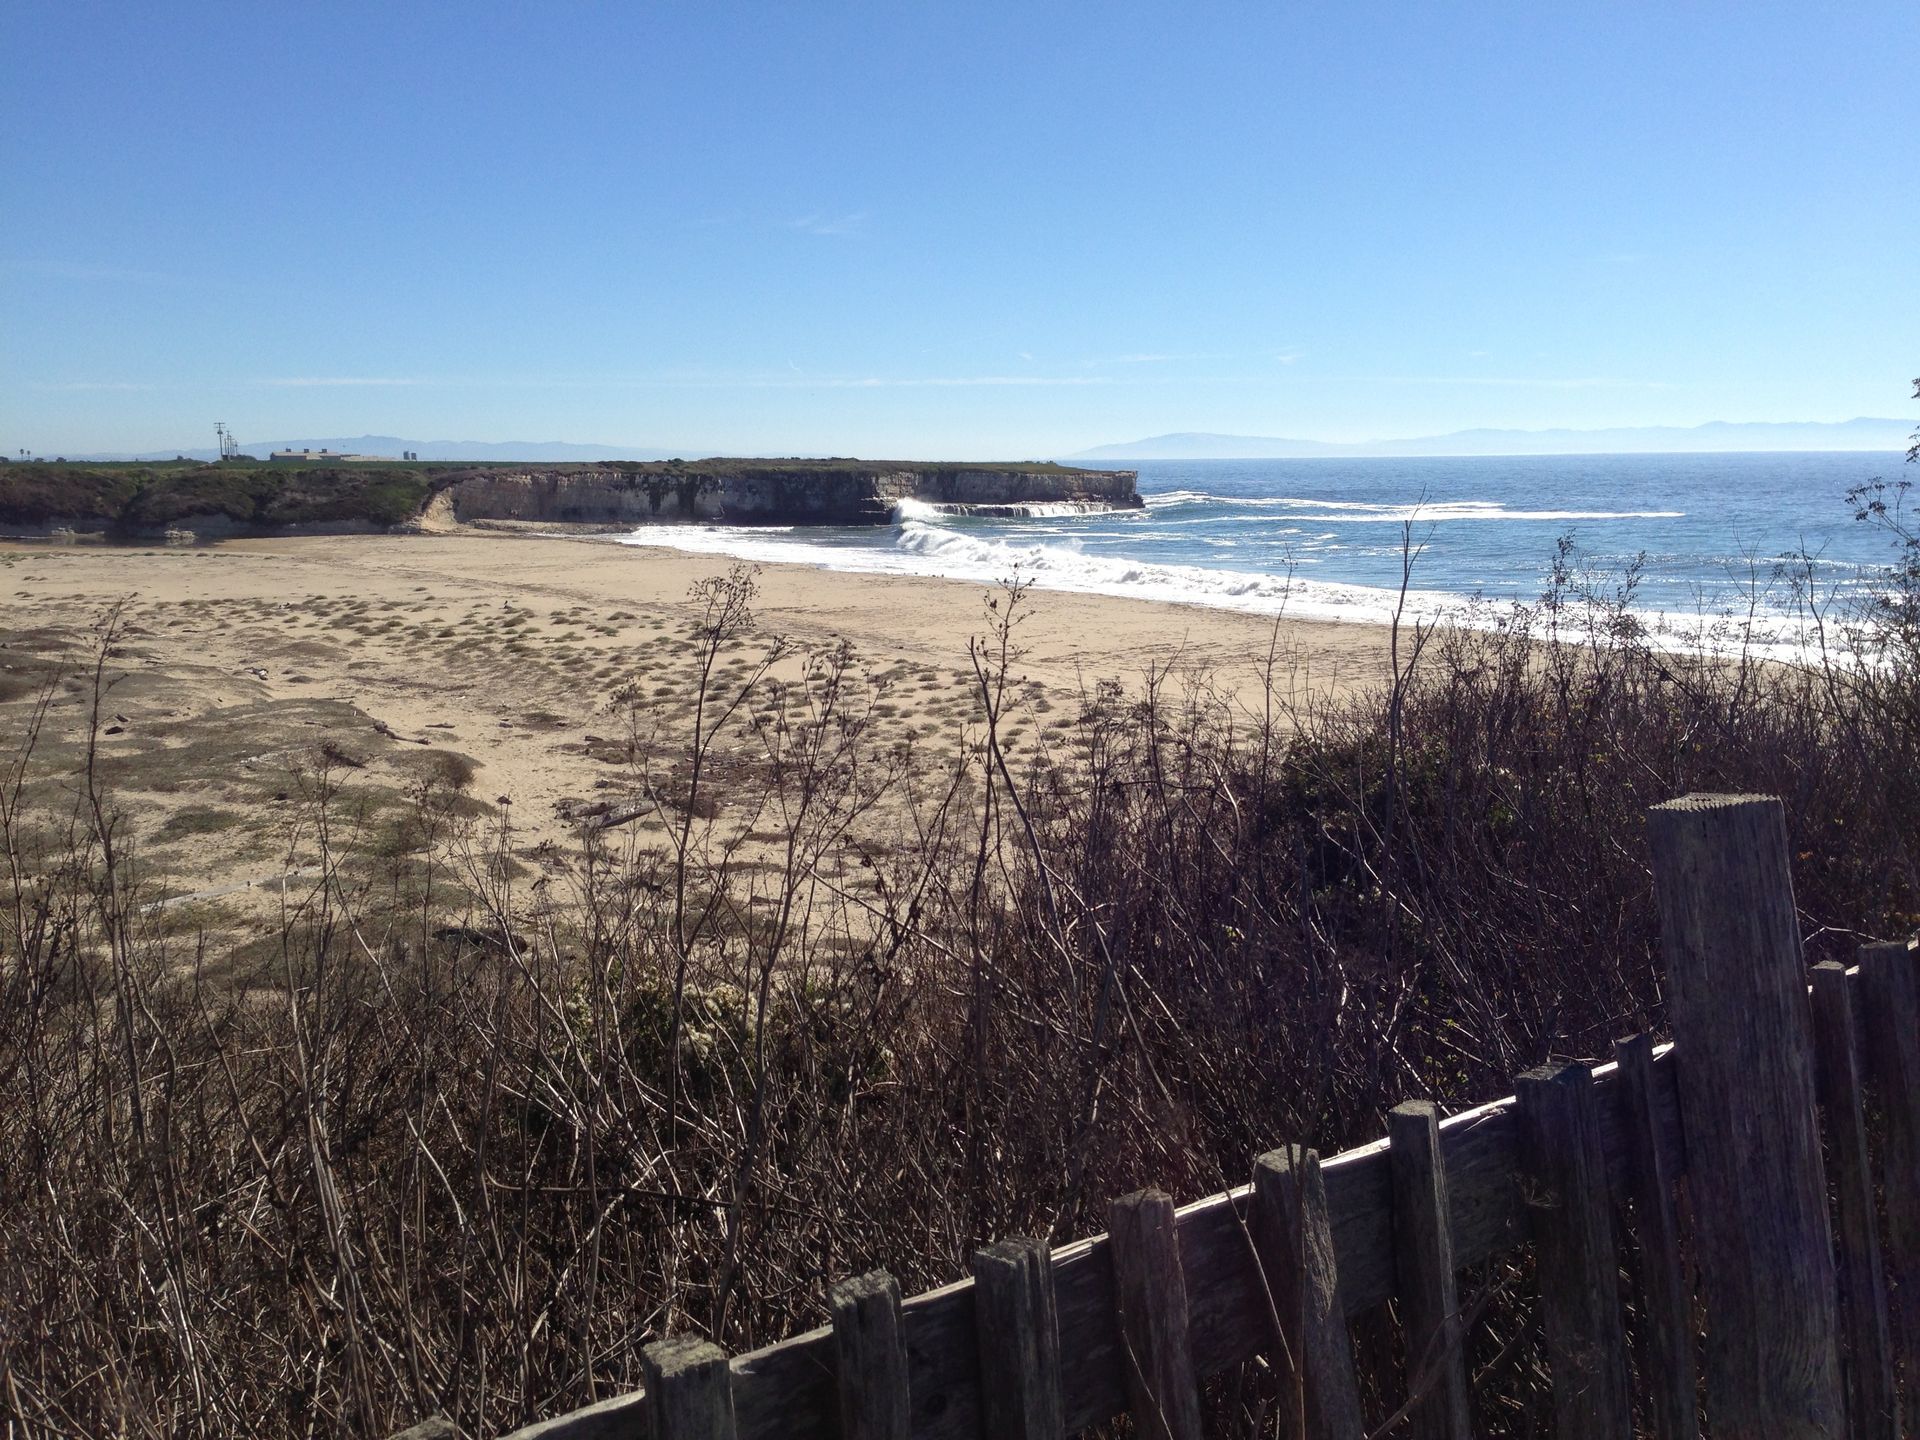 a view of a beach with a fence in the foreground